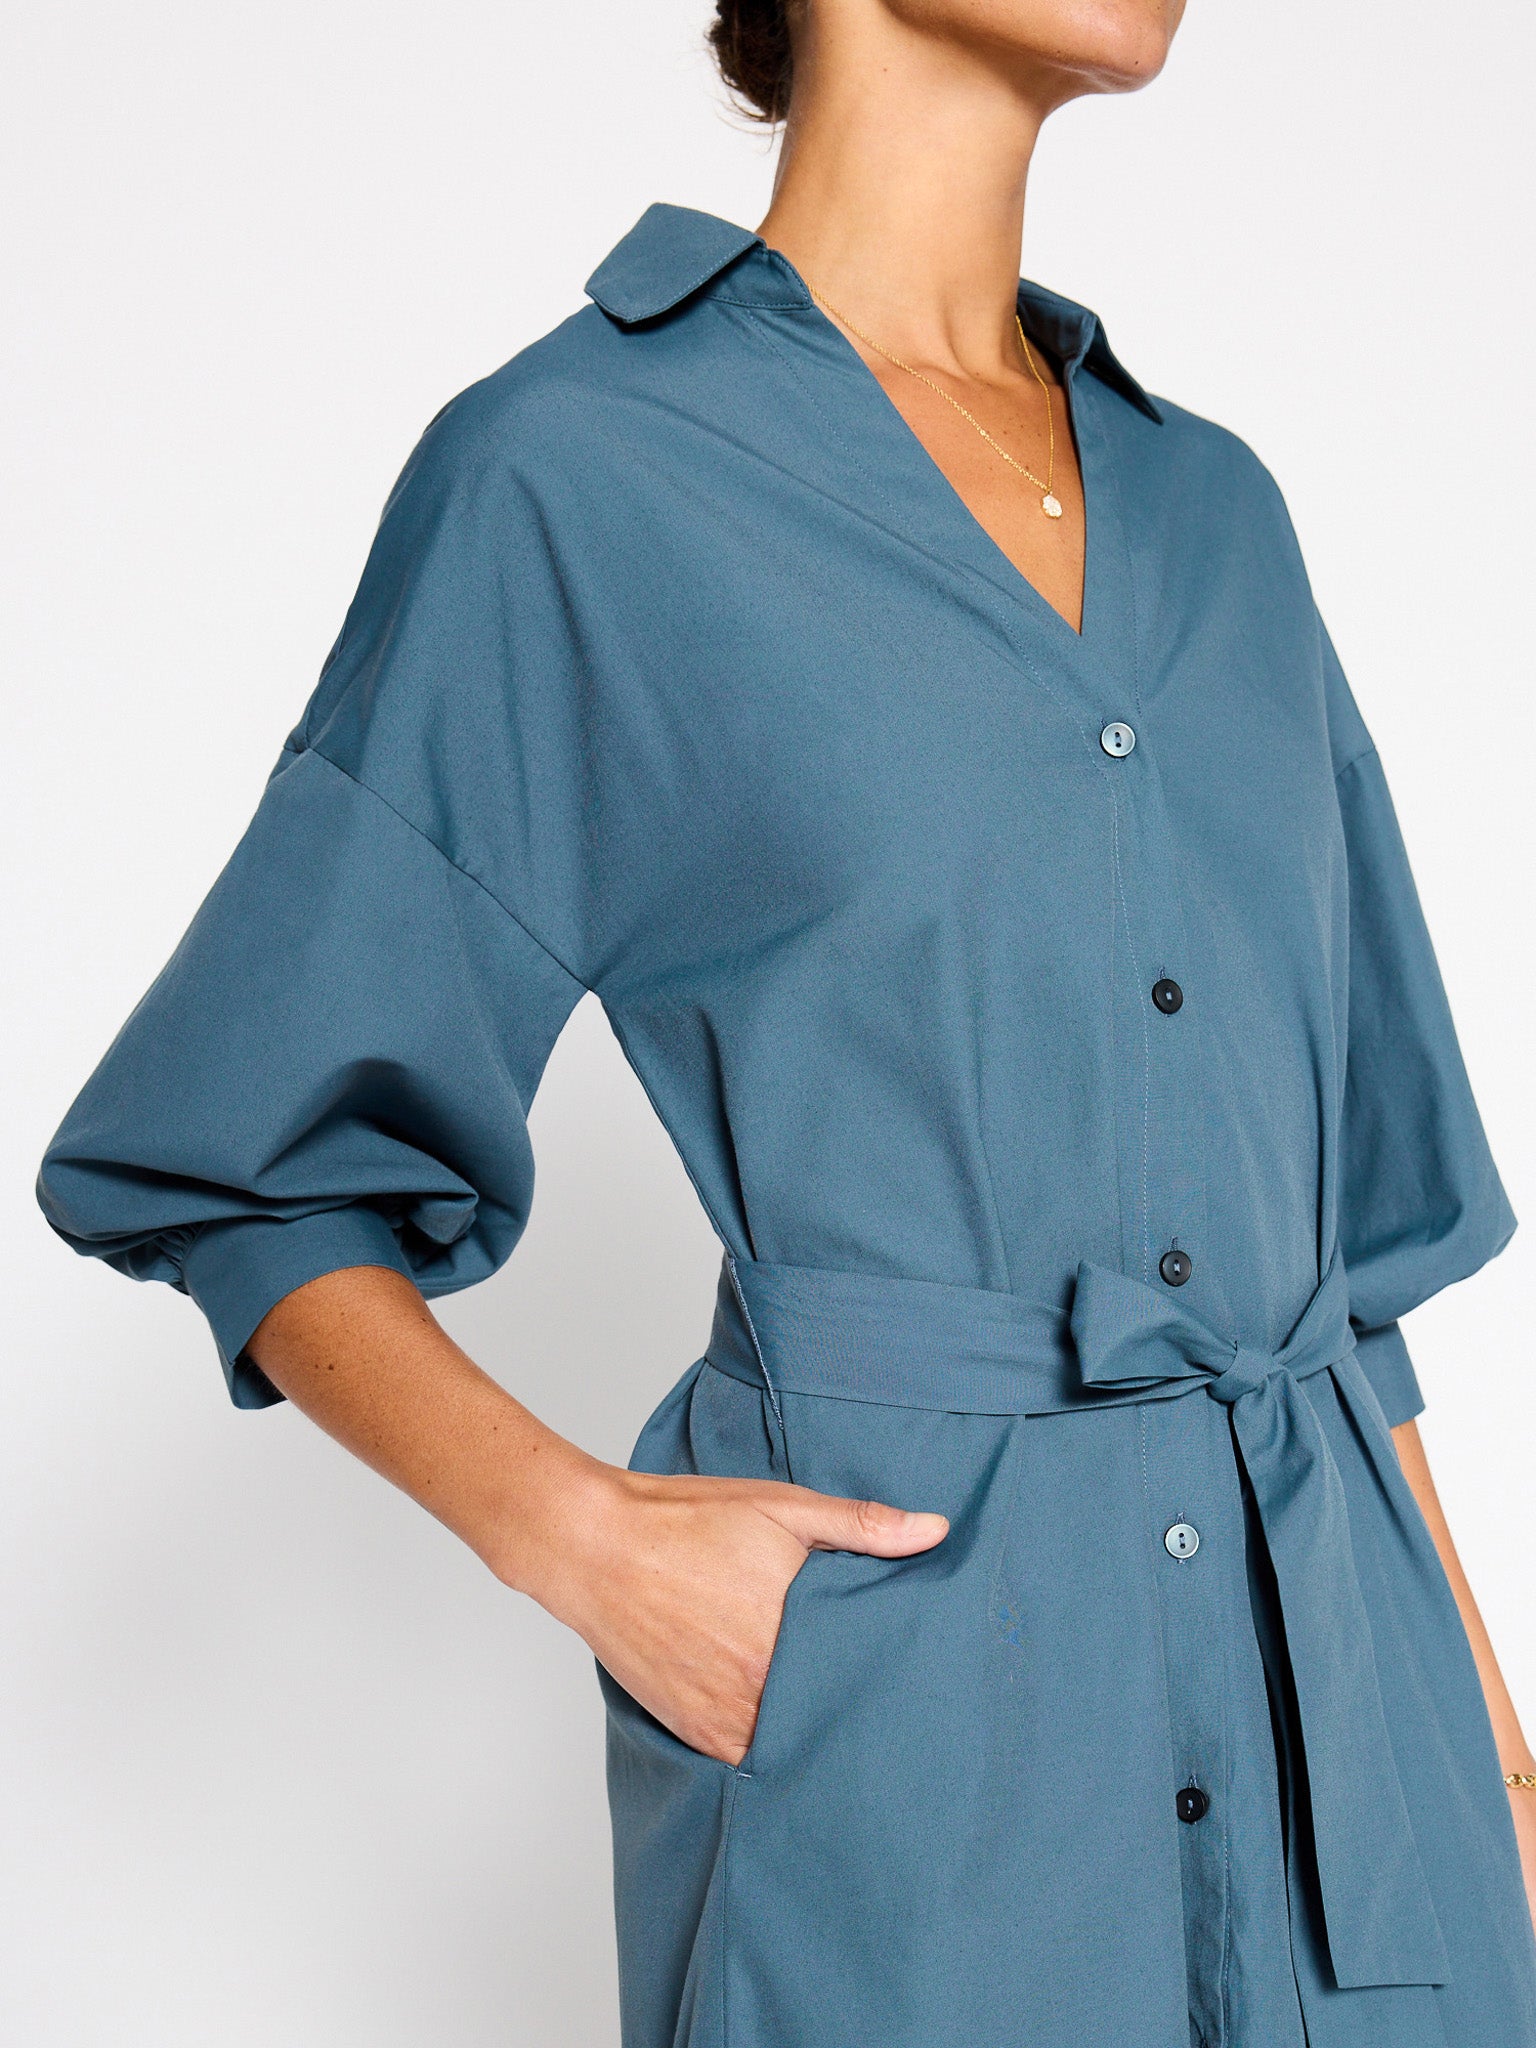 Kate belted button up mini dress blue gray close up